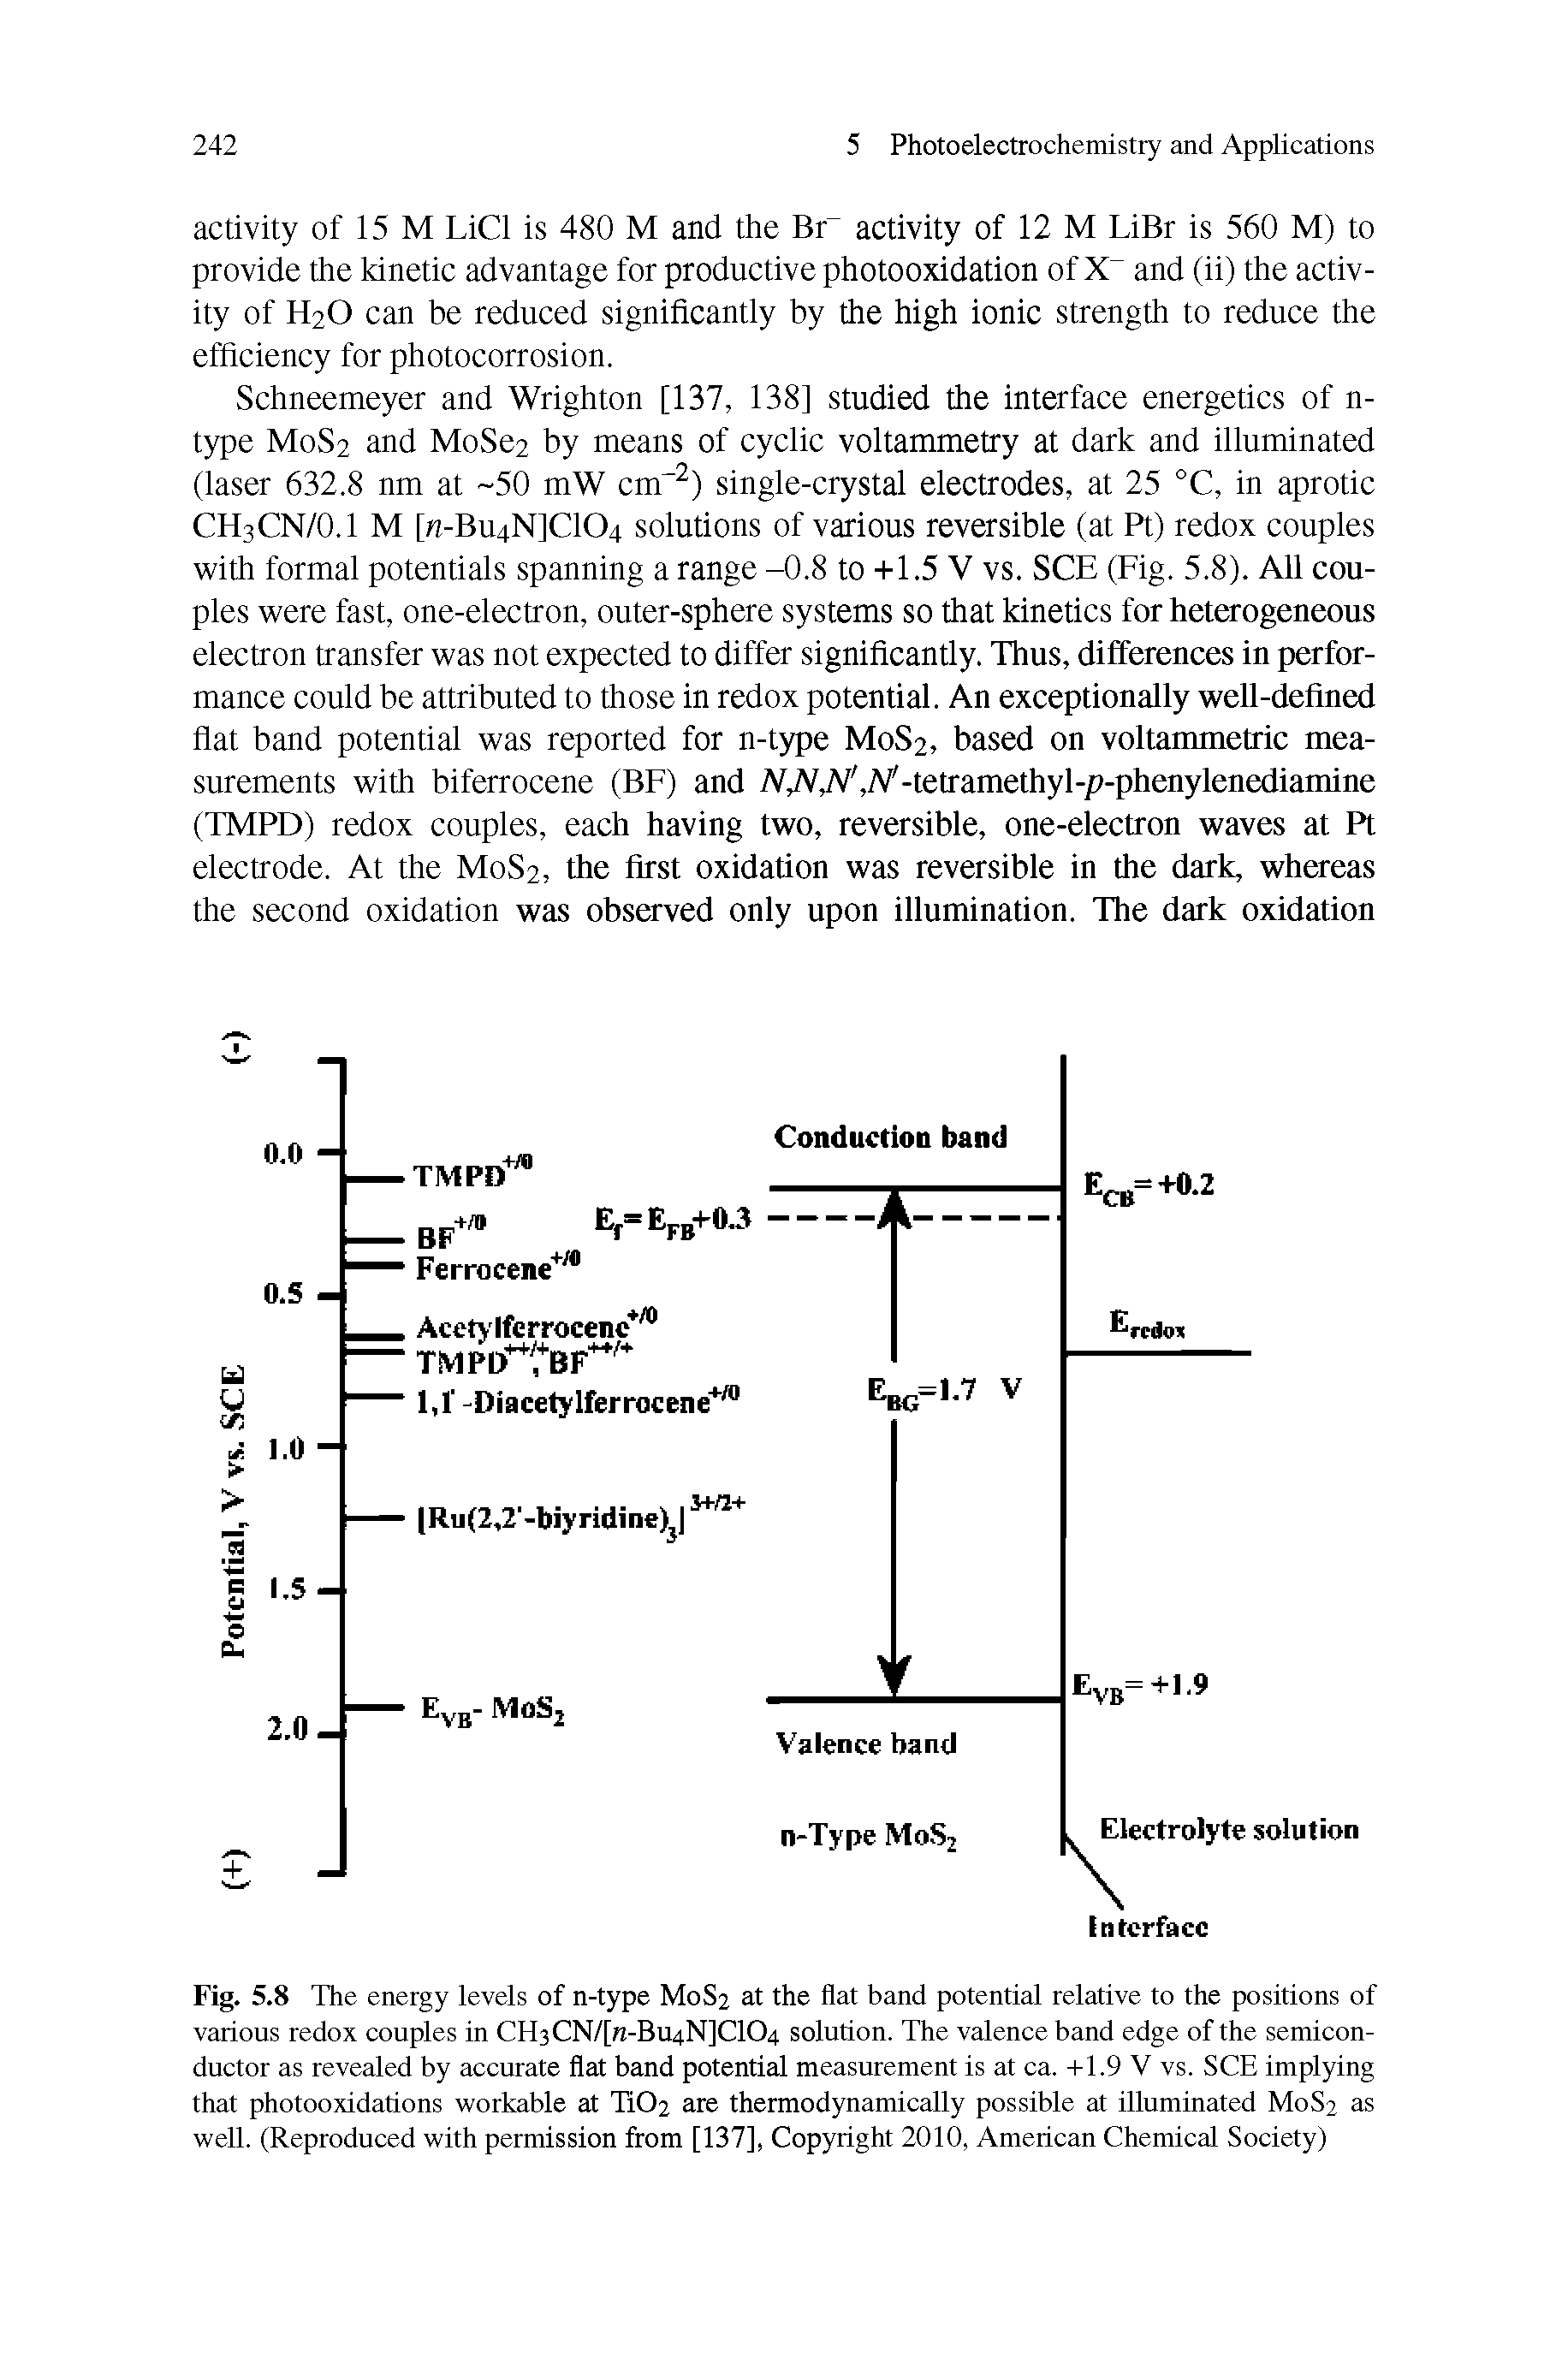 Fig. 5.8 The energy levels of n-type M0S2 at the flat band potential relative to the positions of various redox couples in CH3CN/[n-Bu4N]C104 solution. The valence band edge of the semiconductor as revealed by accurate flat band potential measurement is at ca. +1.9 V vs. SCE implying that photooxrdations workable at Ti02 are thermodynamically possible at illuminated M0S2 as well. (Reproduced with permission from [137], Copyright 2010, American Chemical Society)...